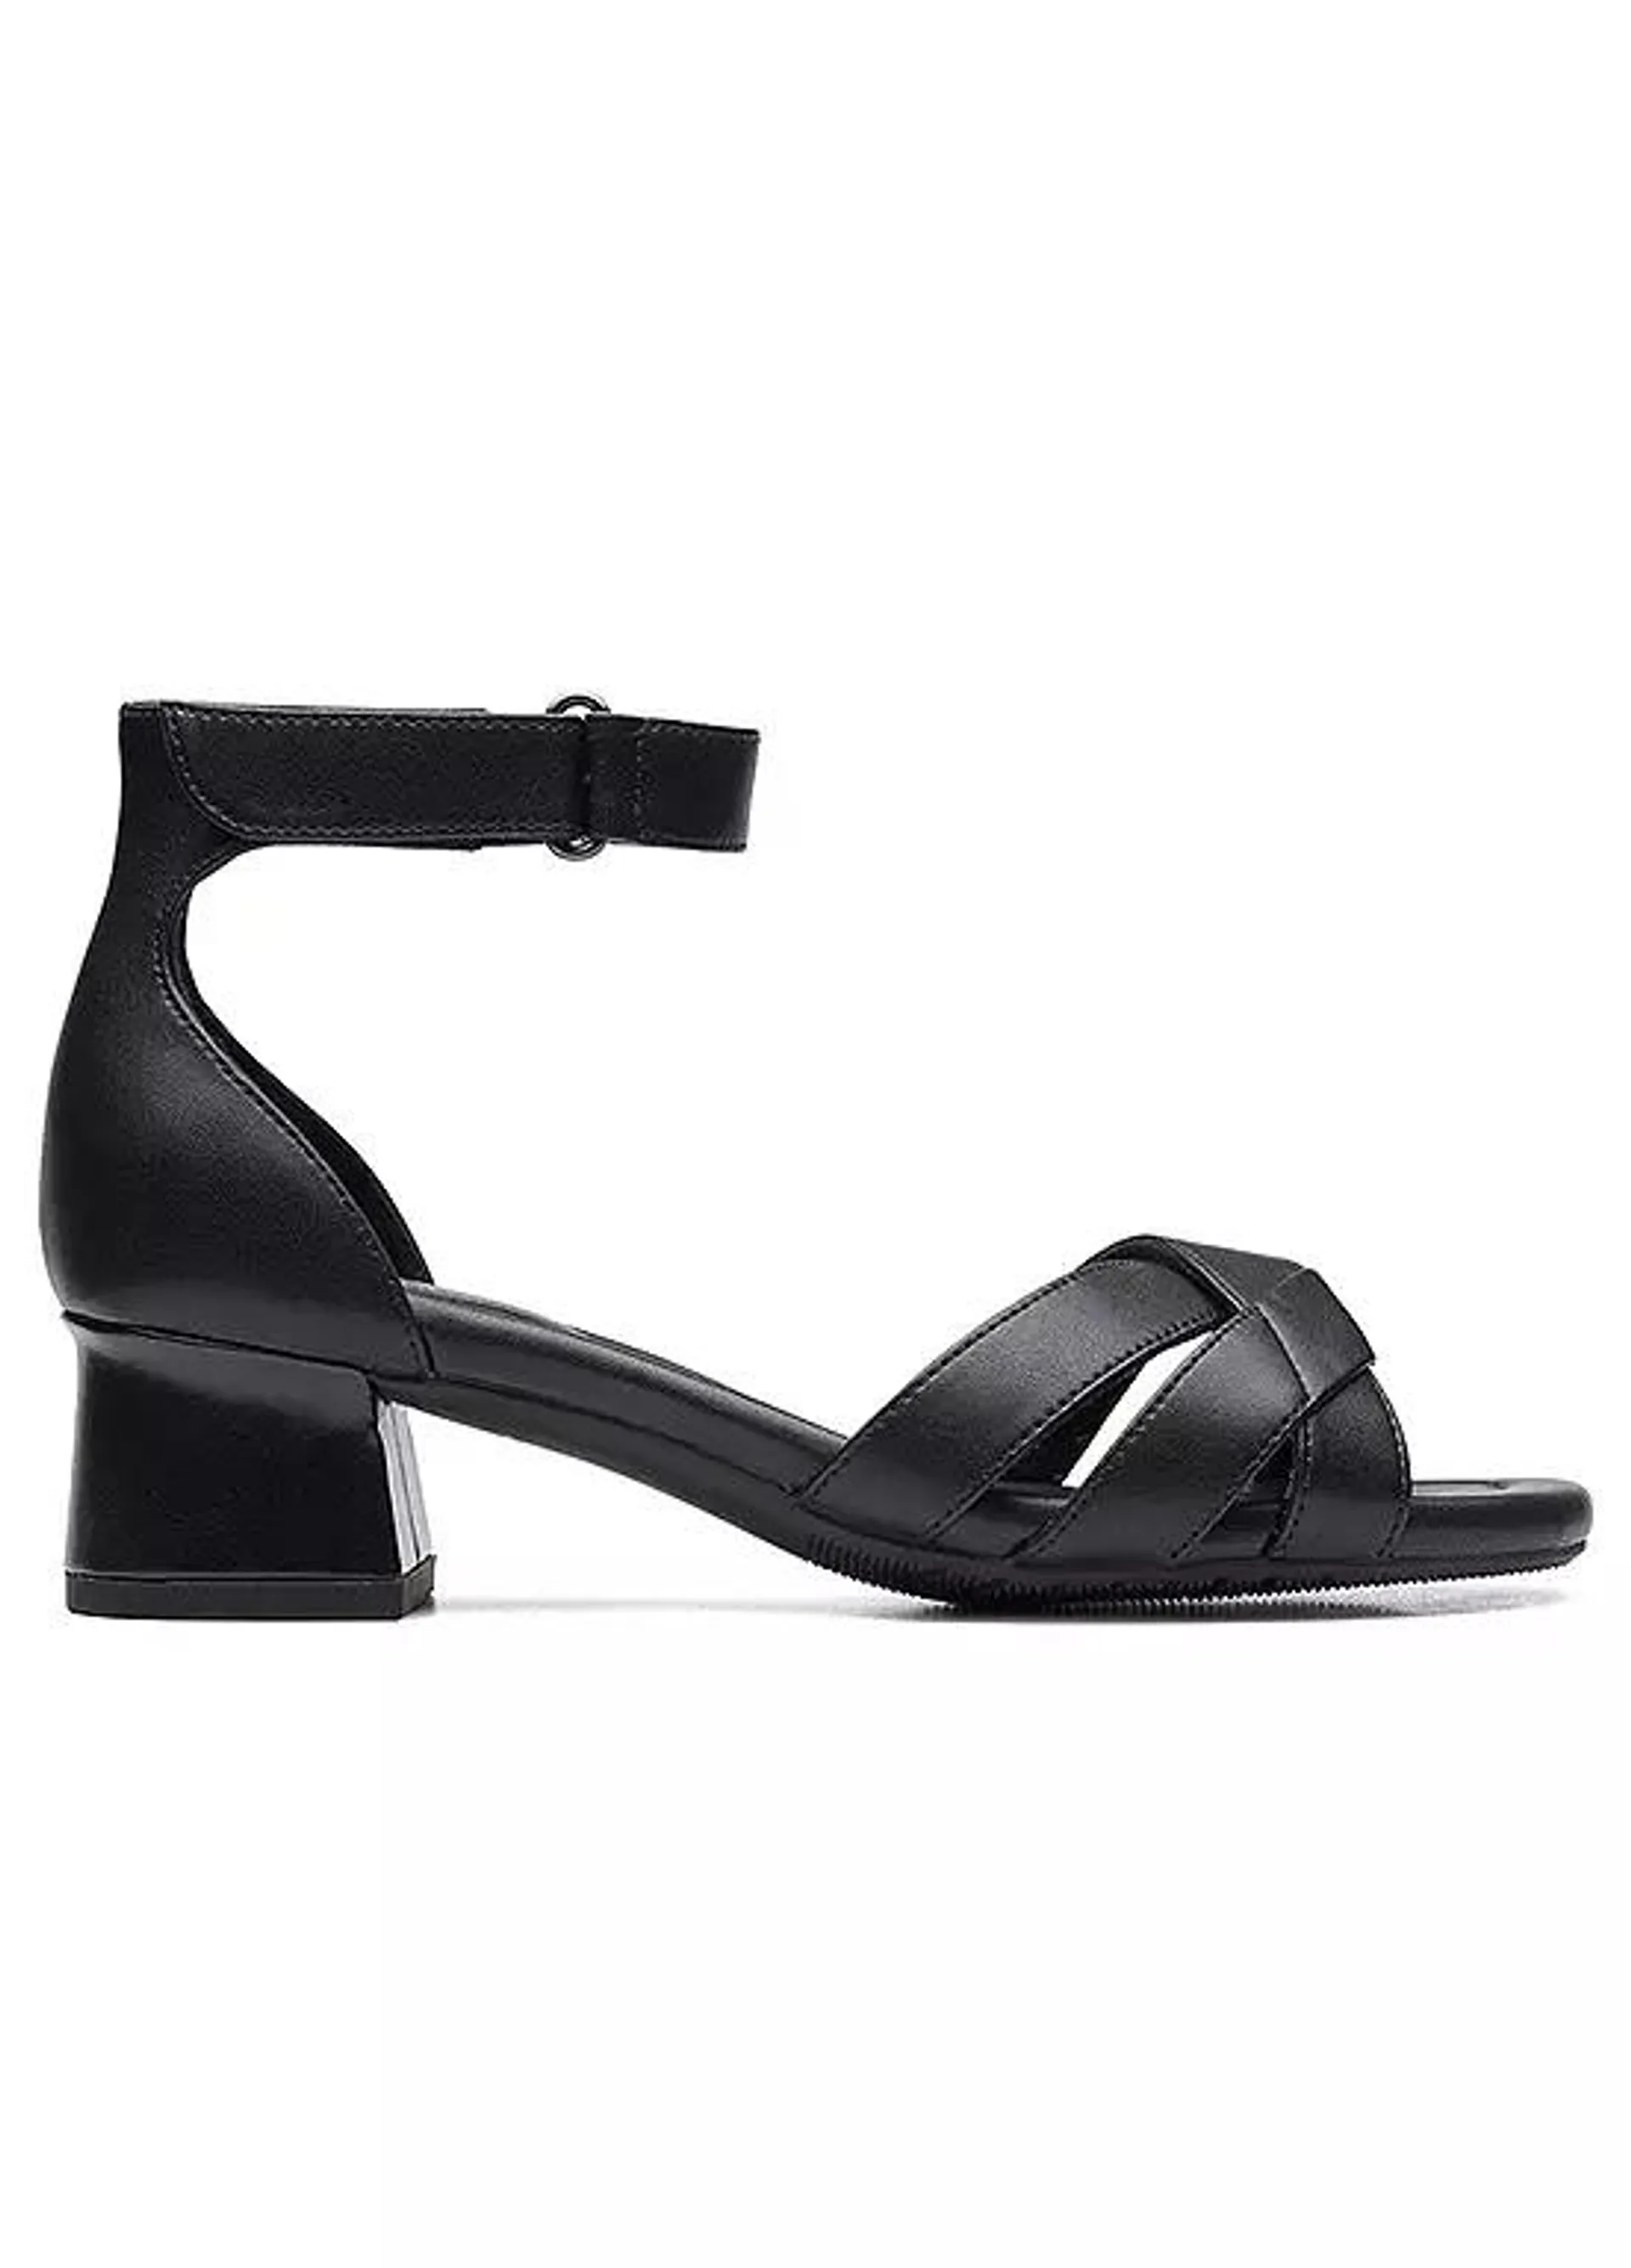 Clarks Collection Desirae Lily Black Leather Block Heel Sandals